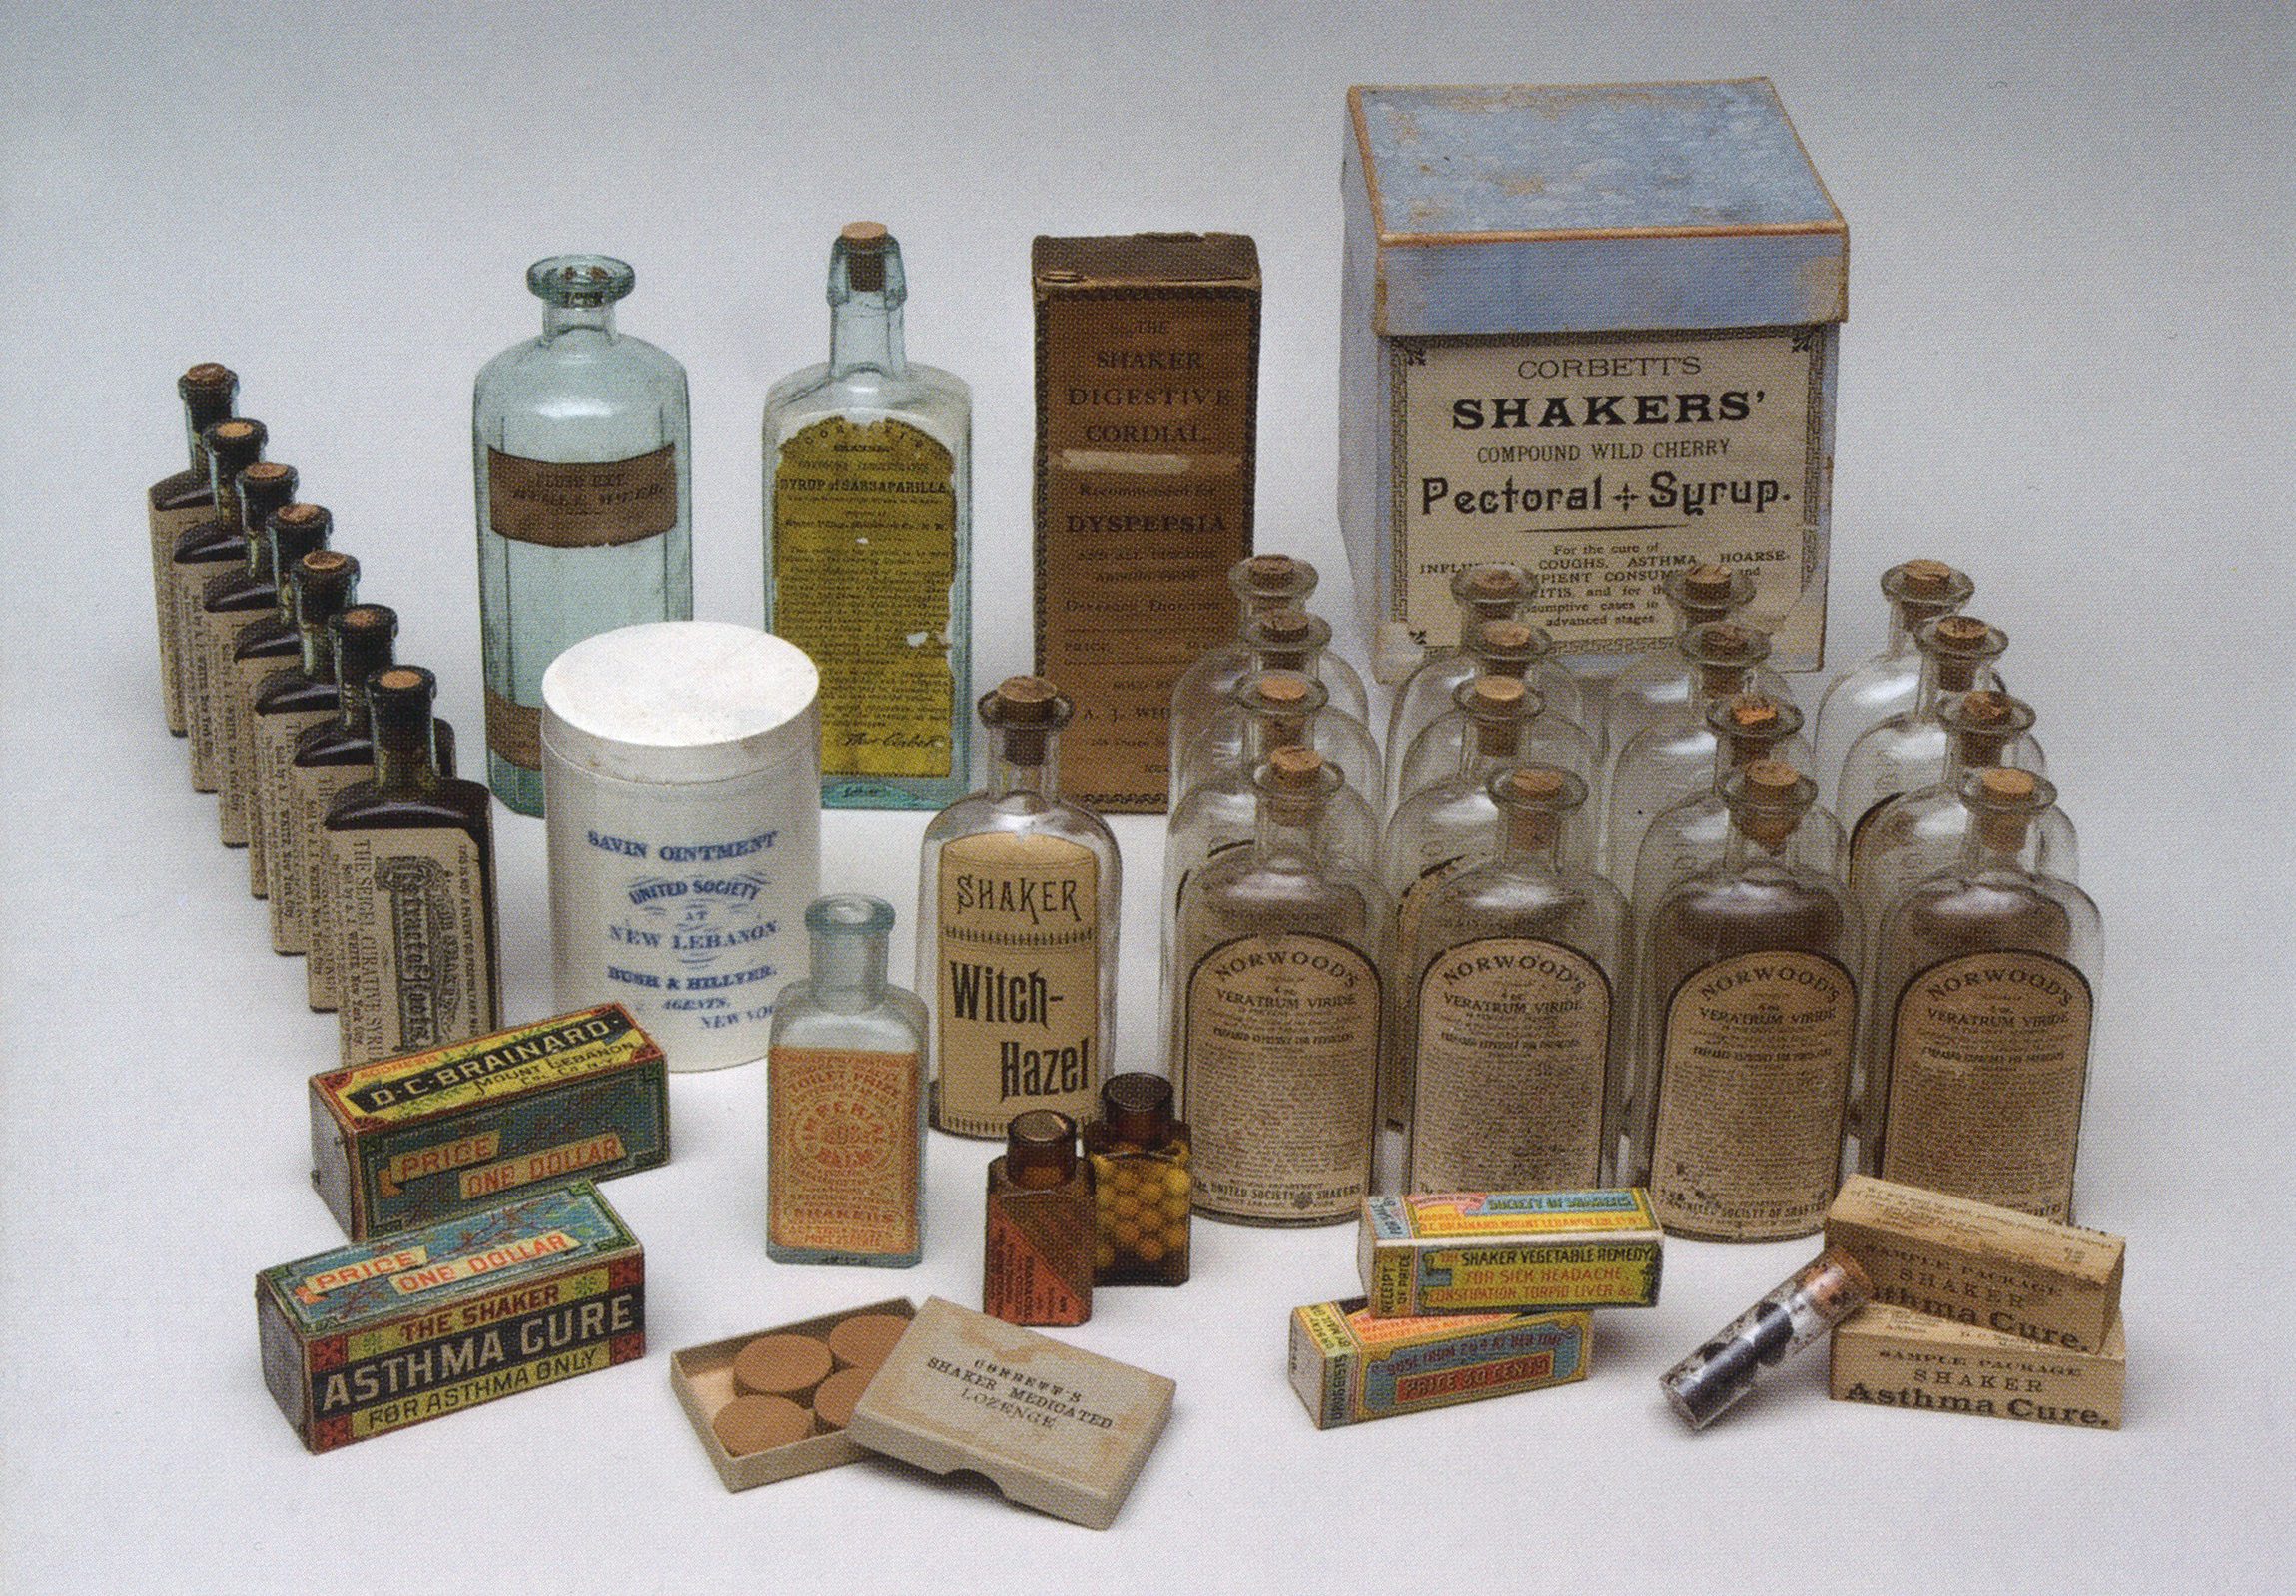 Sample of Shaker medicinal packaging, Collection of the Shaker Museum 